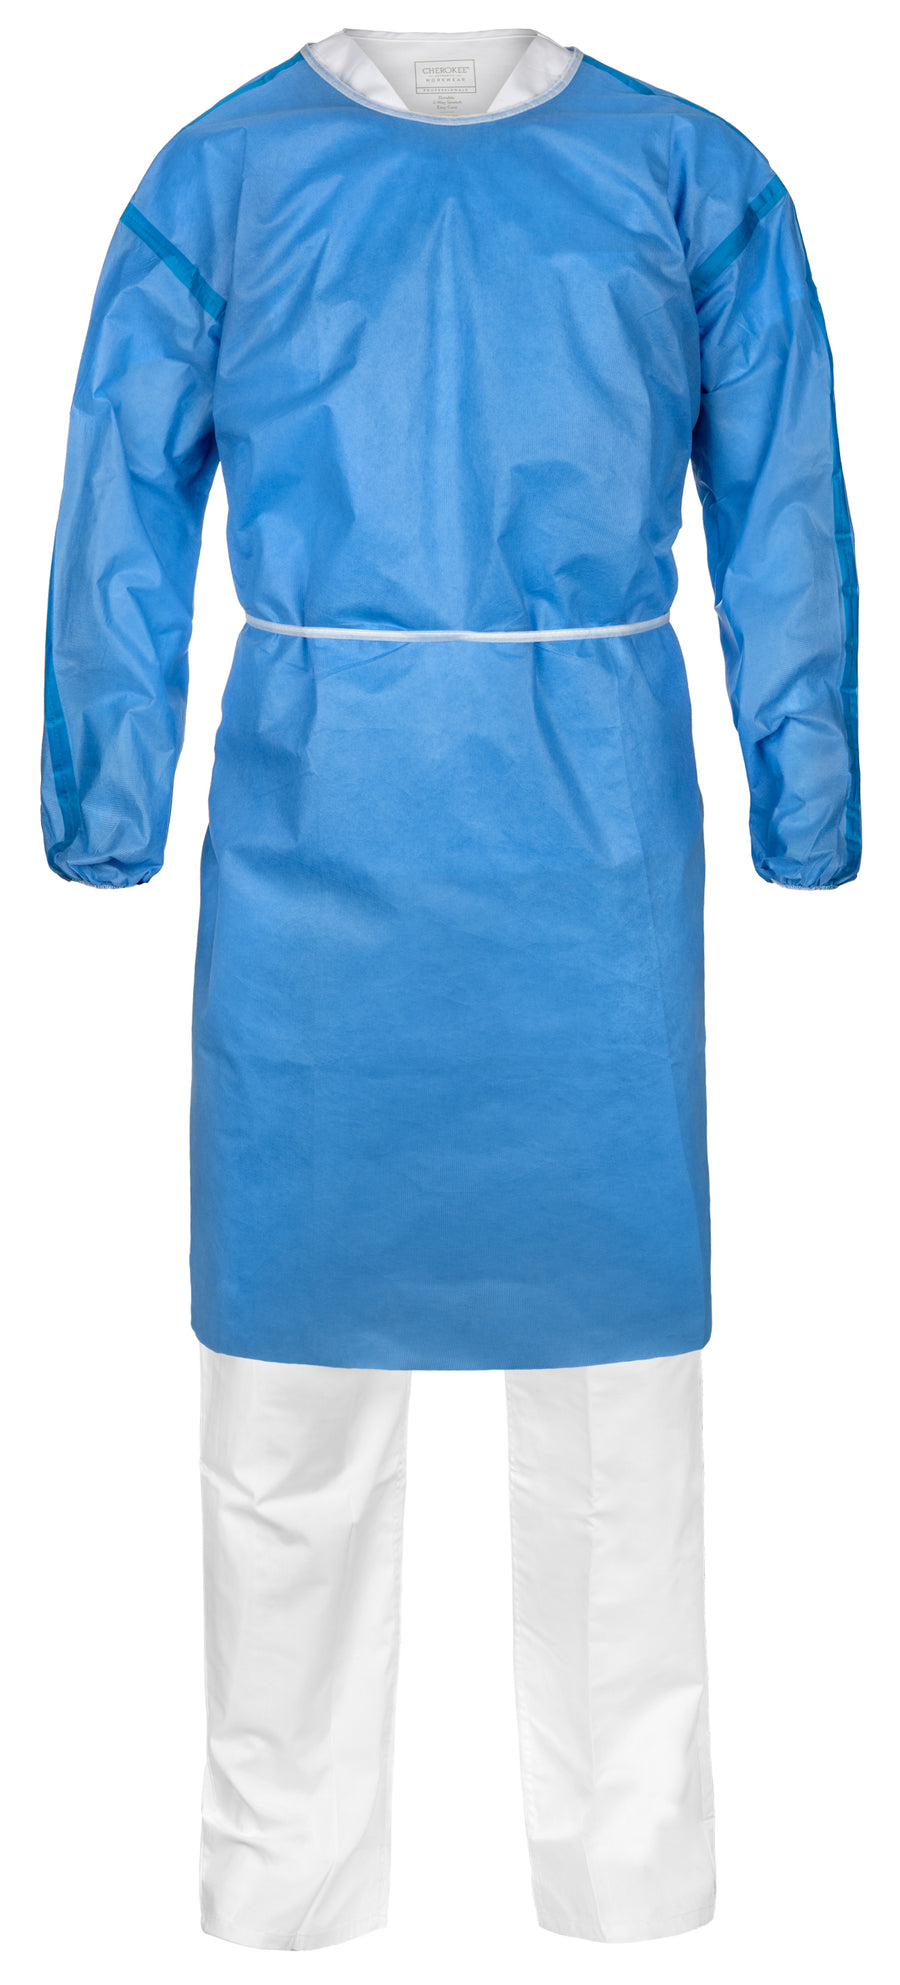 Lakeland AAMI Level 2 Isolation Gown, C8192TIG, 20/ Bag, 5 Bags/ Case